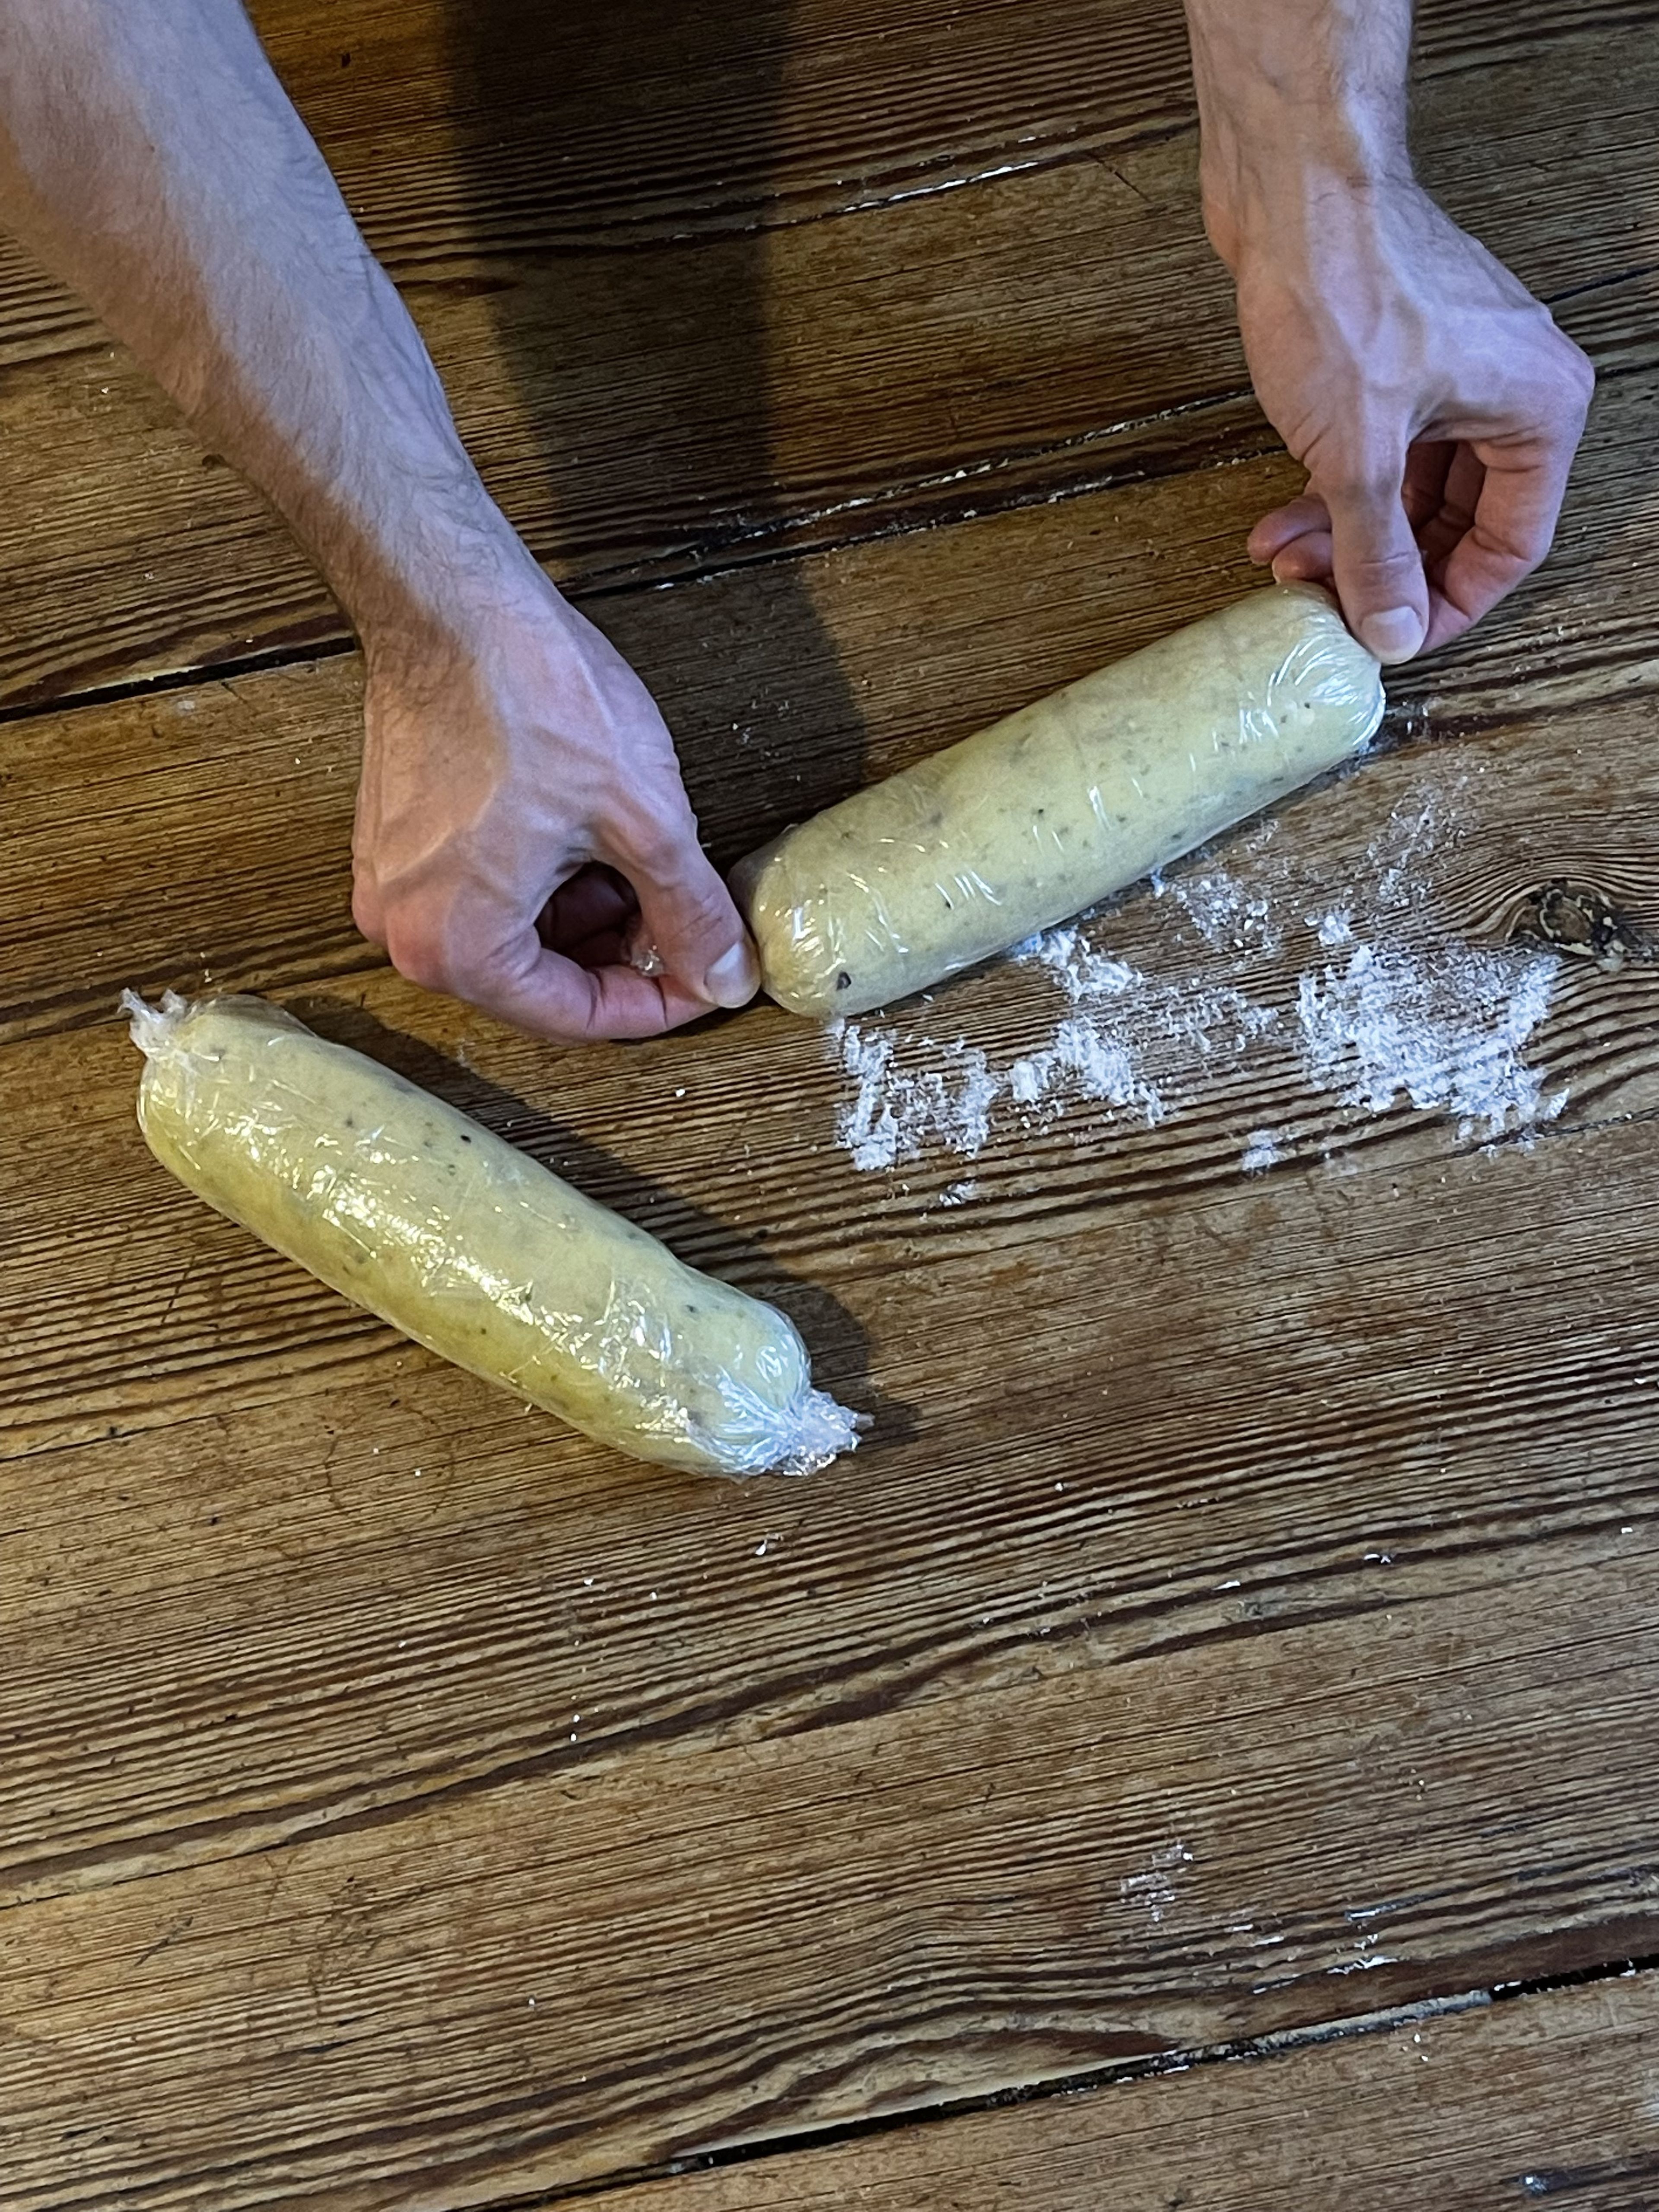 Remove the dough from the bowl. Knead with your hands until smooth. Now divide the dough in half and form it into two rolls with a diameter of approx. 4 cm. Wrap each dough roll in plastic wrap and let rest in the refrigerator for about 1 hr.